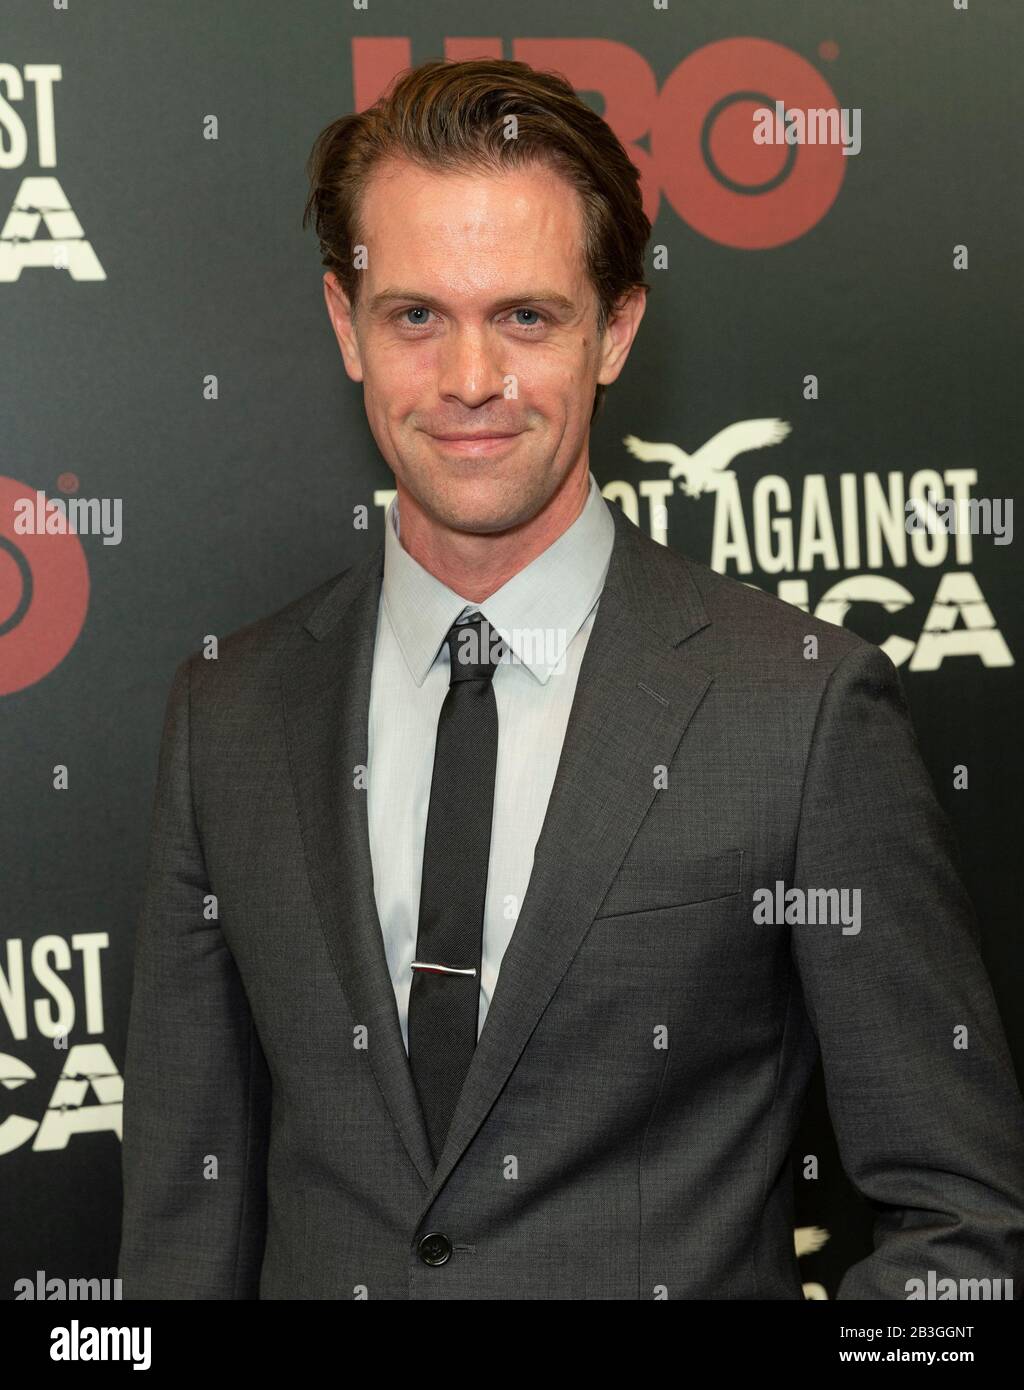 New York, NY - March 4, 2020: Ben Cole attends HBO's "The Plot Against America" premiere at Florence Gould Hall Stock Photo